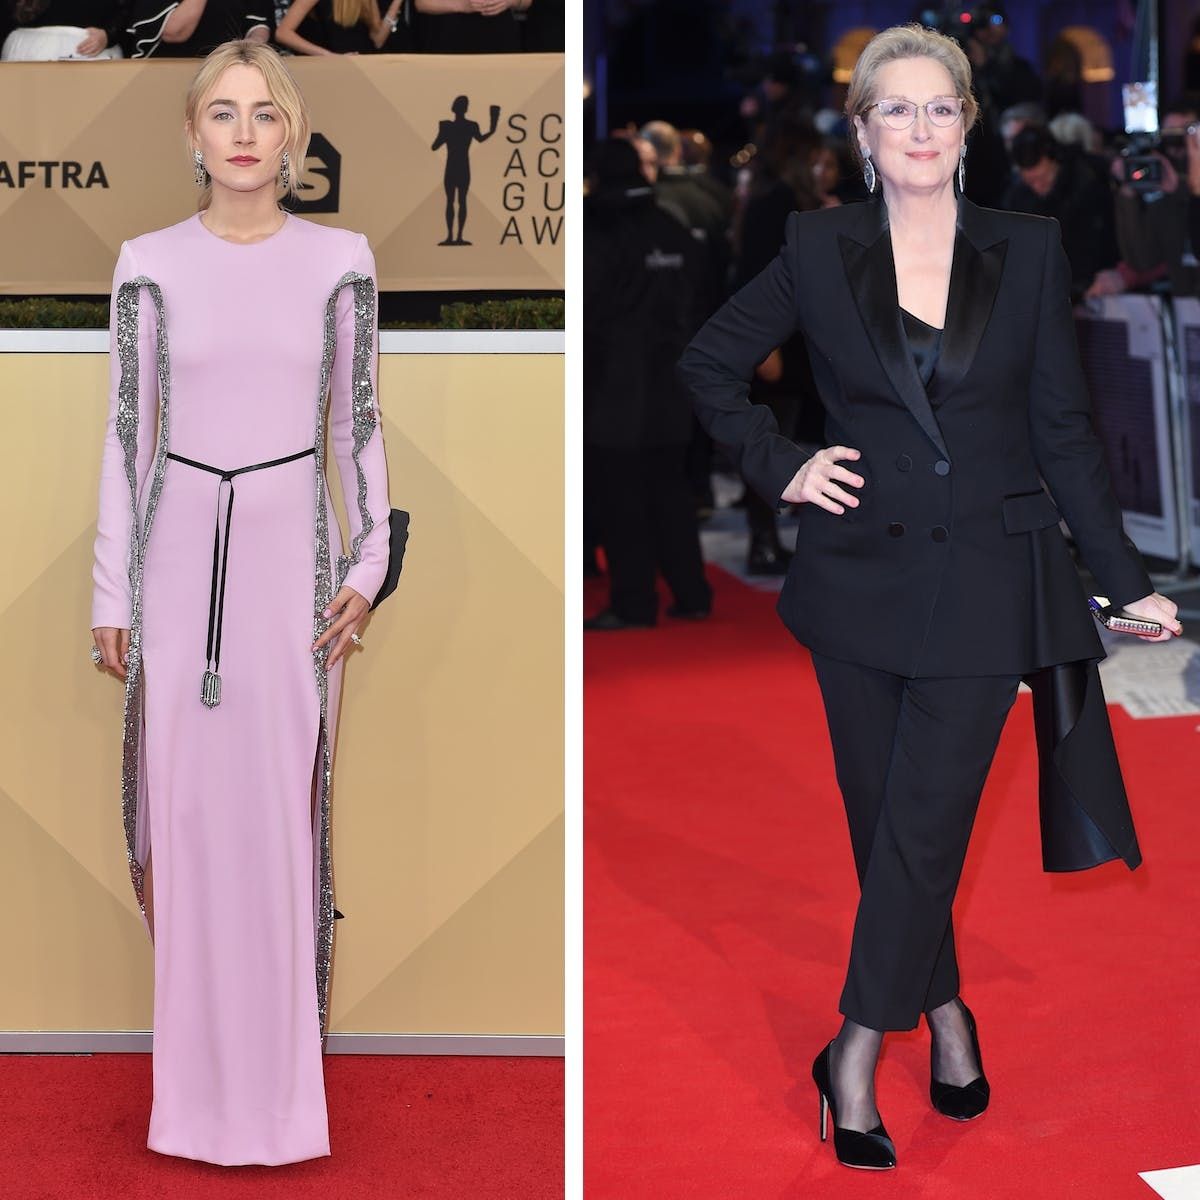 The First and Last Red Carpet Looks of the 2018 Oscars Best Actress Nominees